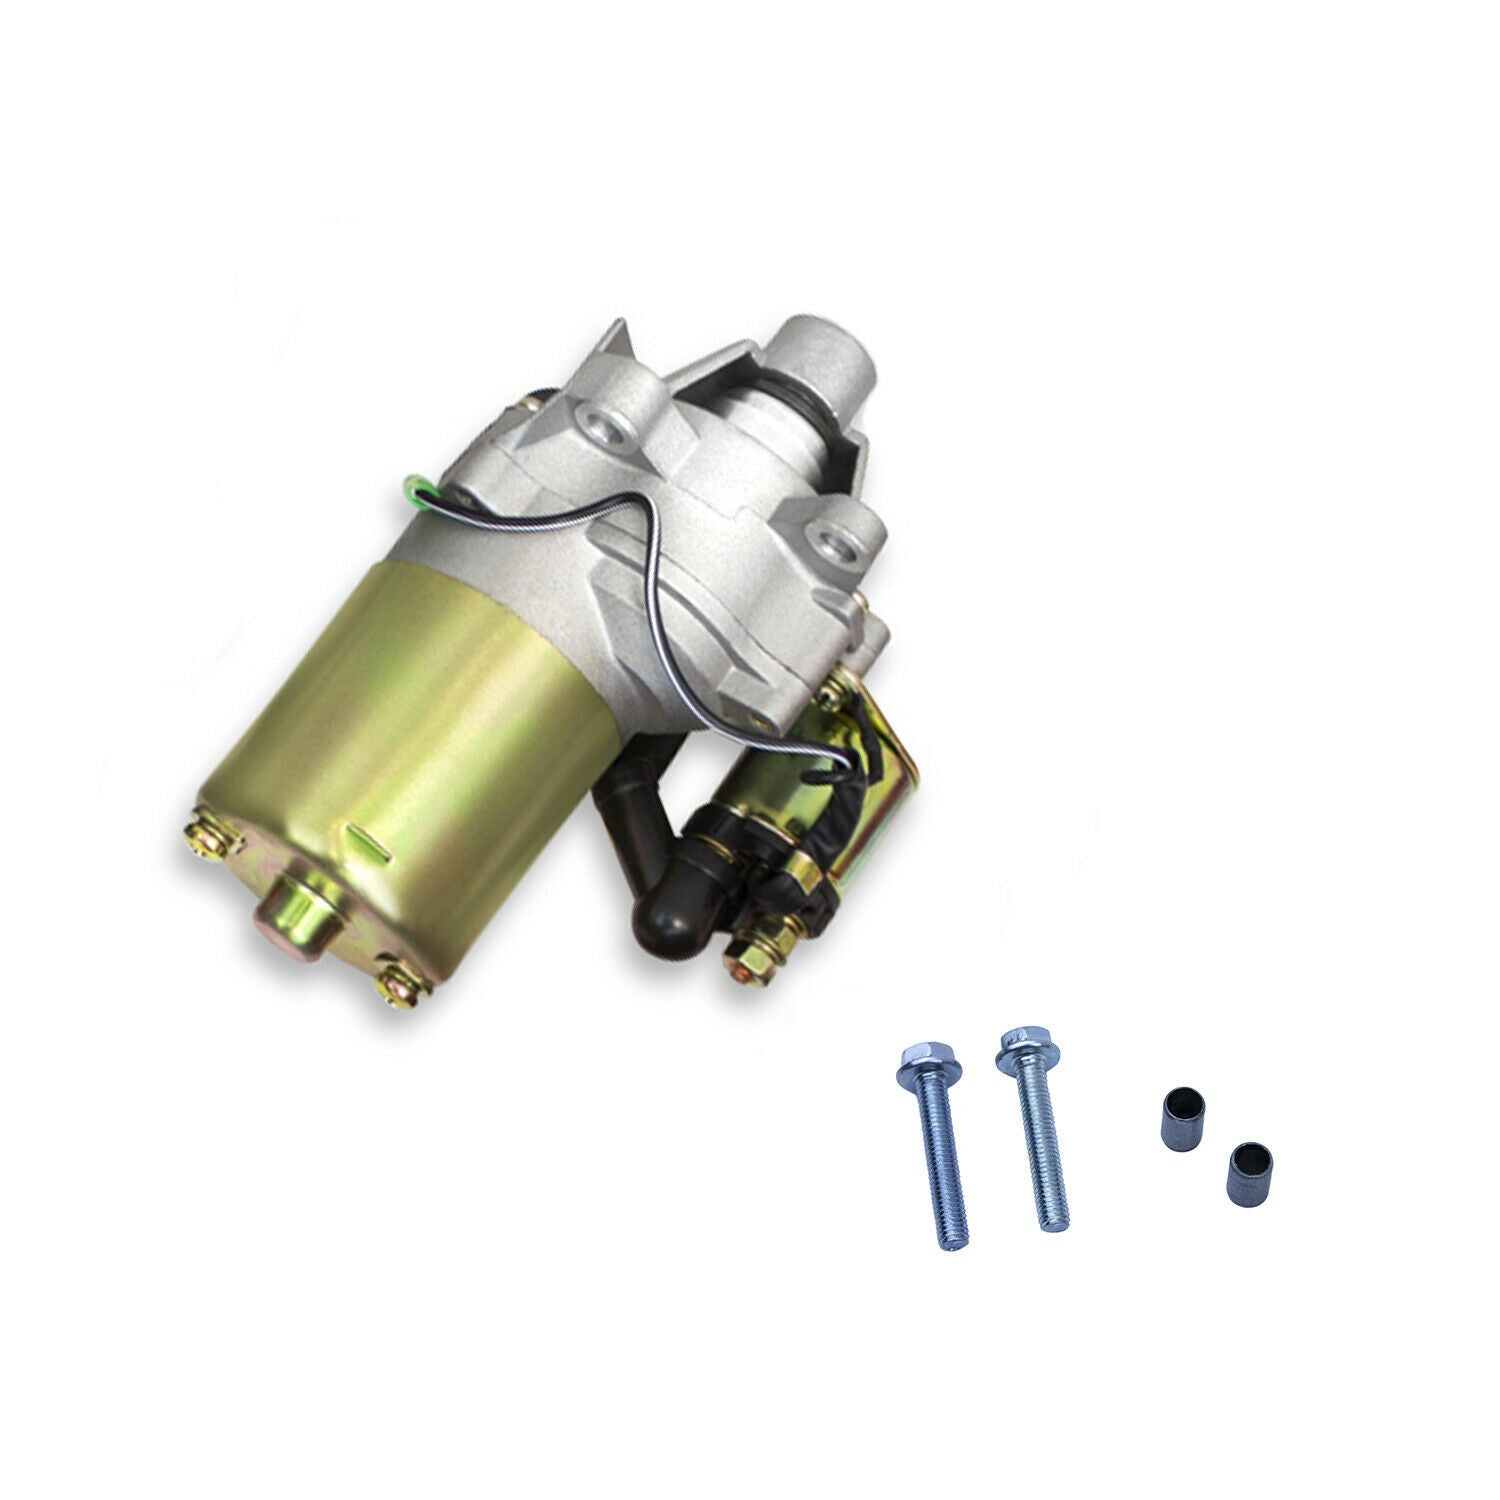 Electric Starter Motor Kit fits Honda GX160, GX200 with Recoil Pull Start, Ignition Coil, Flywheel-3